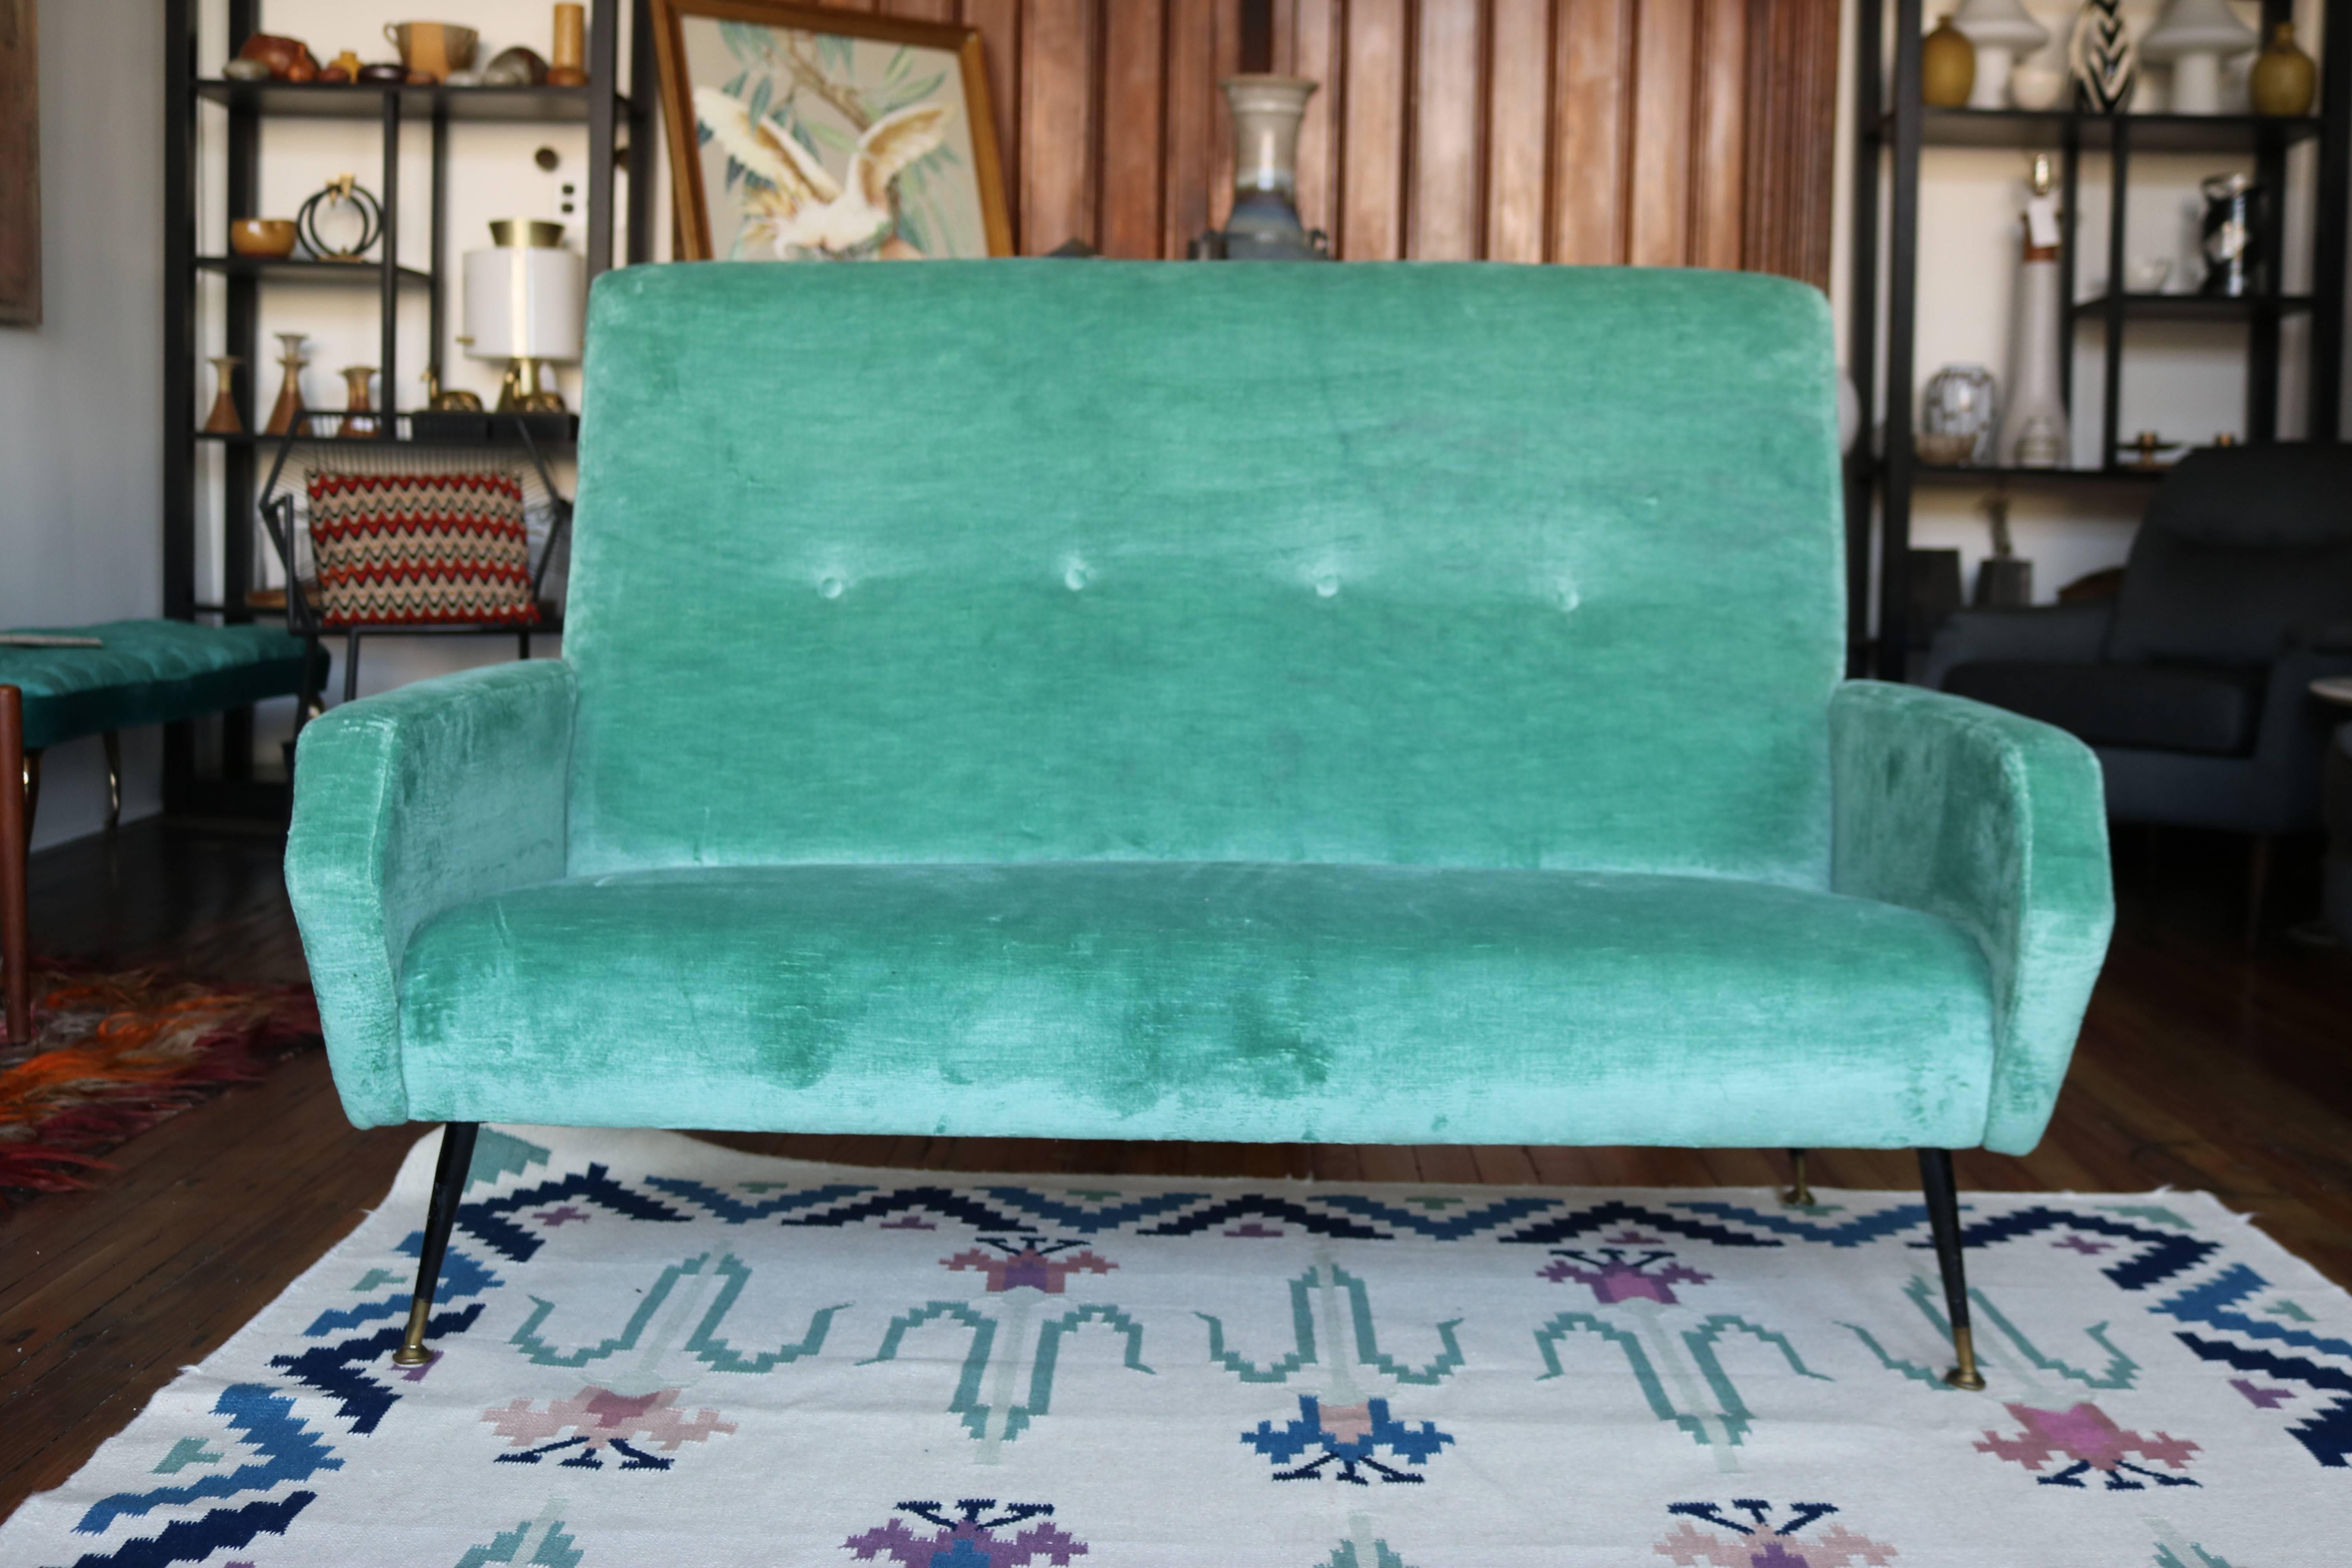 This sleek and lovely sofa was made in Italy in the 1950s. The crushed aqua velvet appears to be original, and while it does show wear (a few thin areas and 